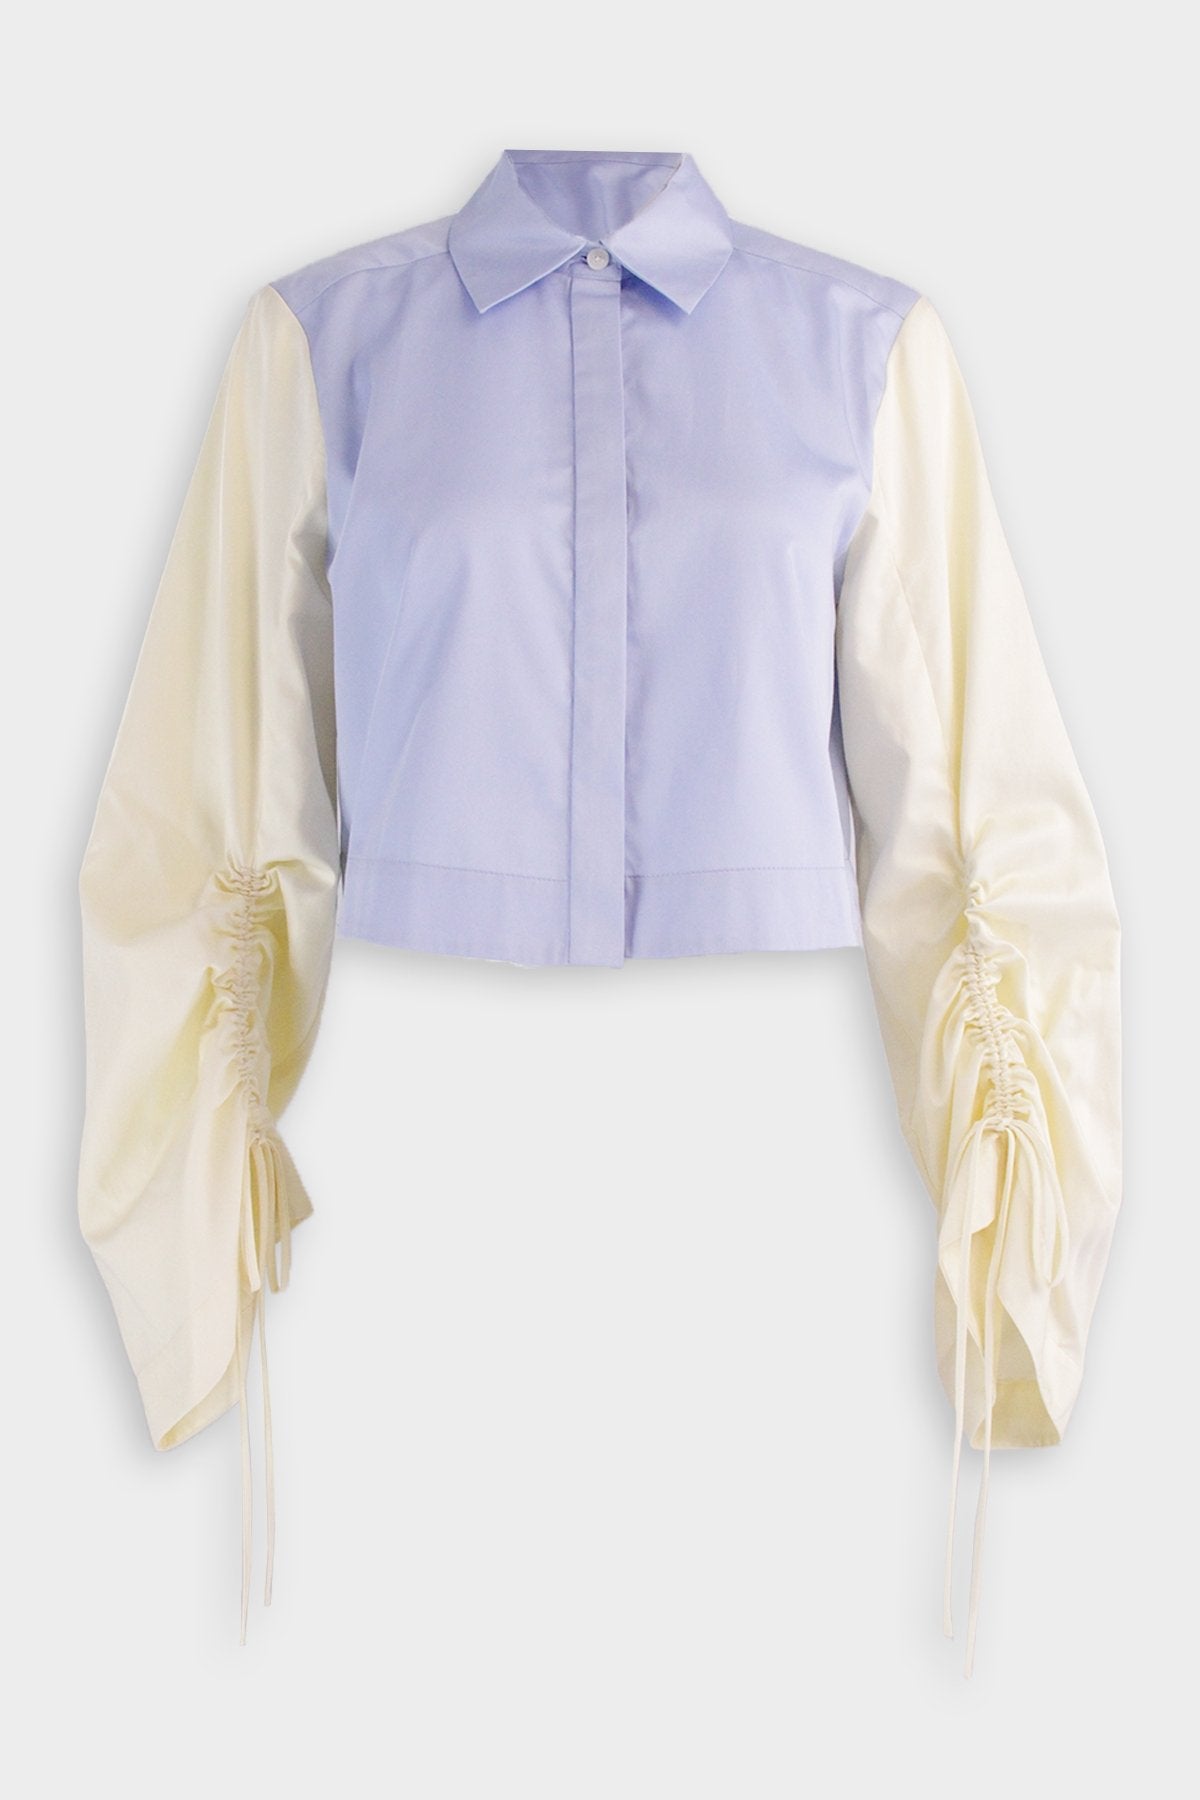 Kinsley Blouse Top in Light Blue and Pale Yellow - shop-olivia.com